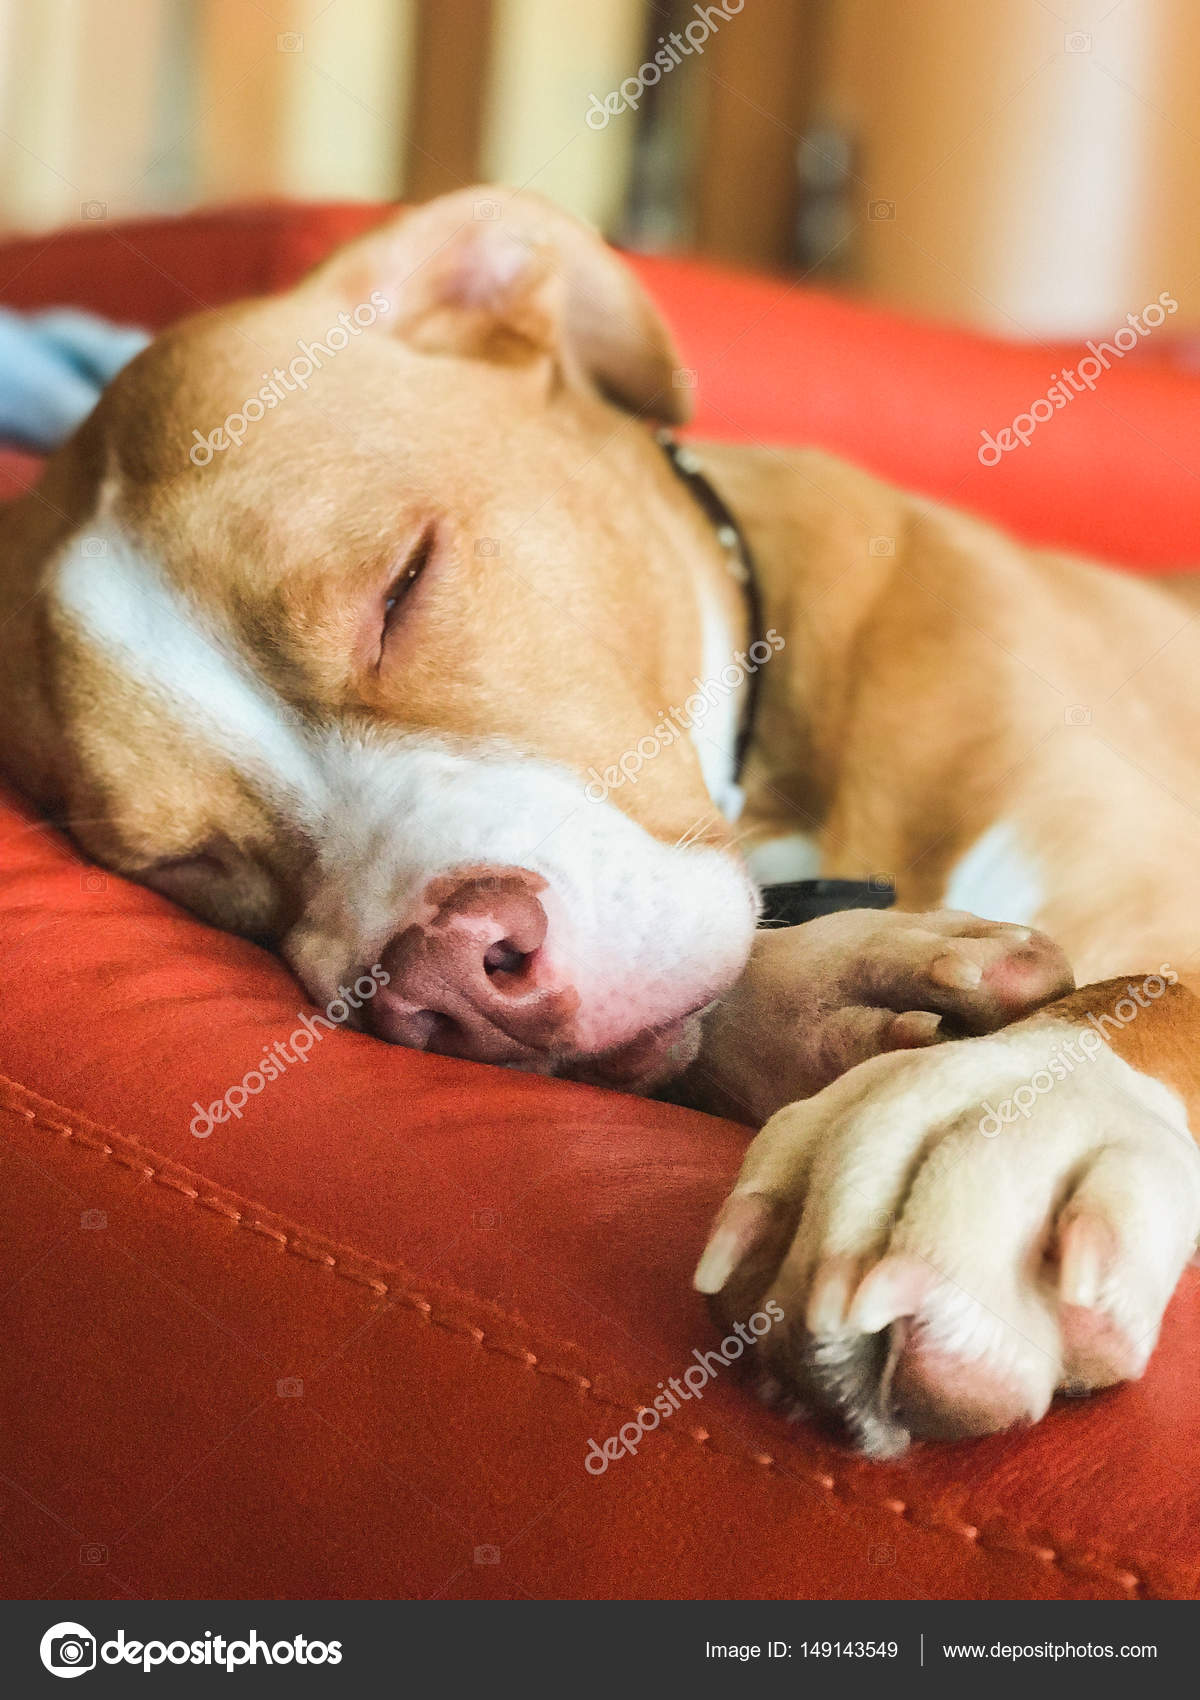 Sleeping american pit bull terrier, beige color — Stock Photo ©  lisssbetha@gmail.com #149143549